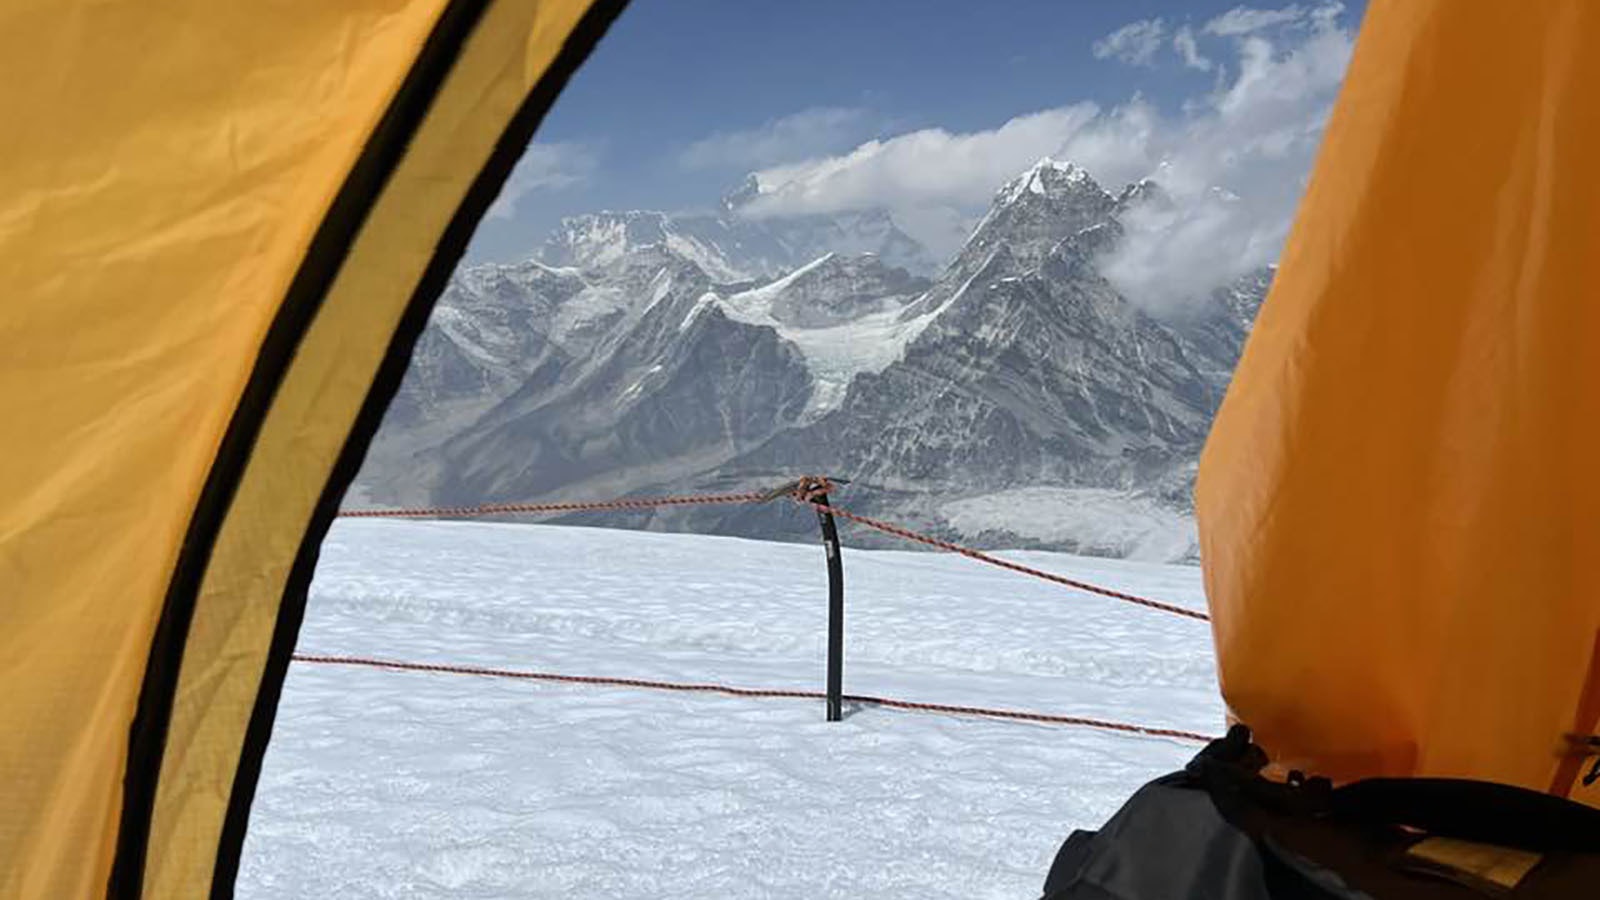 Dr. Joe McGinley said he wants to focus on the positive despite being foiled from his latest climbing attempt to summit Mount Everest. He shared his view from his tent on Mera Peak, just 19 miles from Everest.